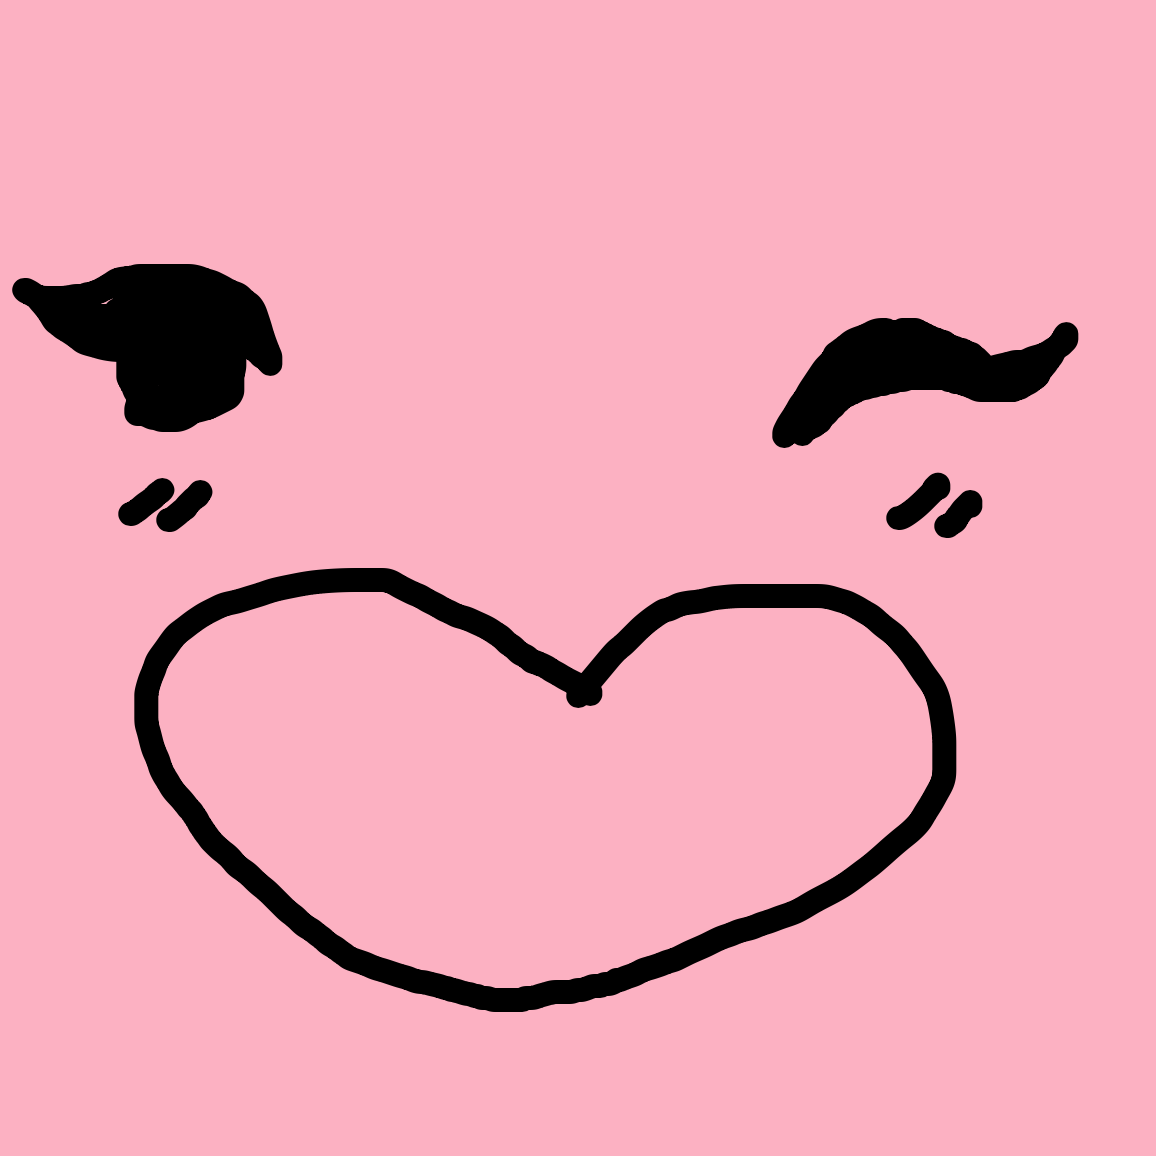 Drawing in draw a derp on ur fave colour by unfortunate fool